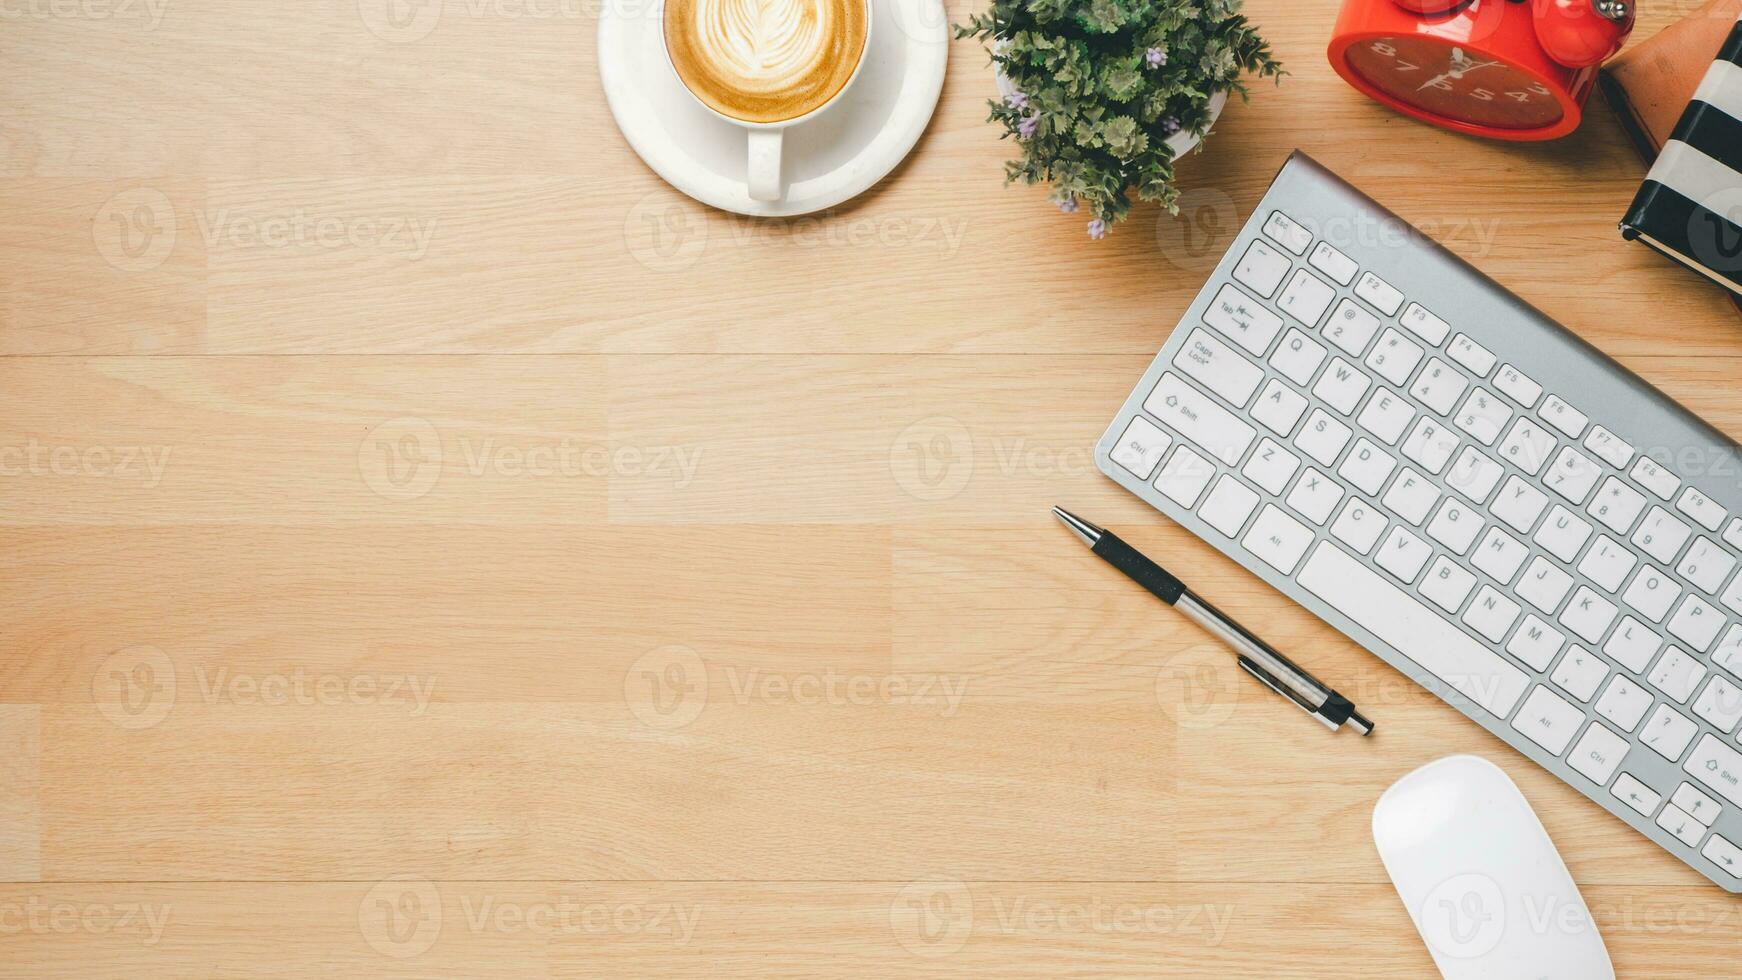 Office wooden desk with keyboard, notebook, pen, mouse and cup of coffee, Top view wth copy space, Flat lay. photo